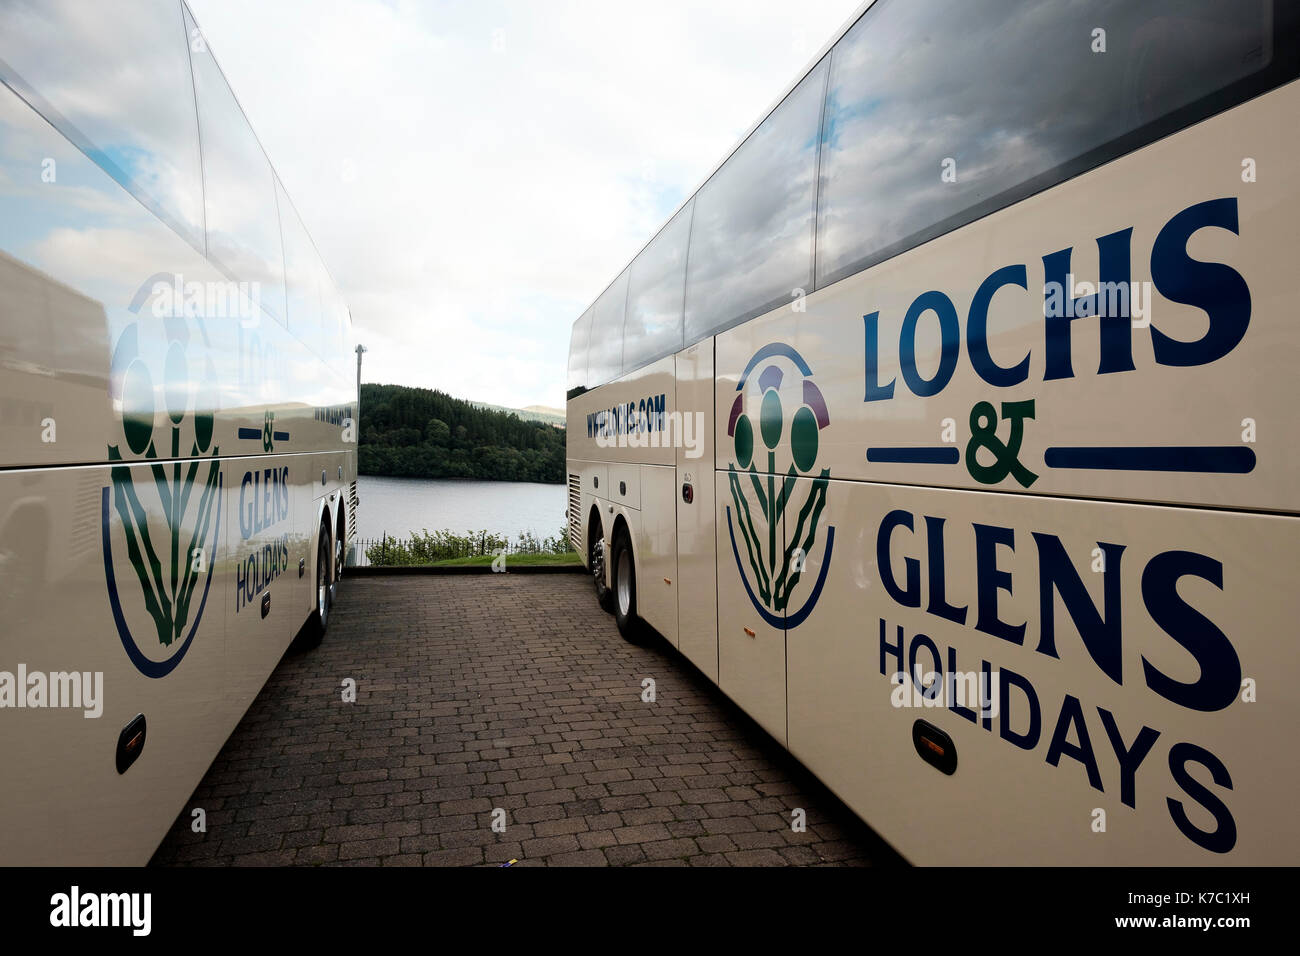 Lochs and Glens Holidays tour coaches parked at The Loch Awe Hotel above the Loch Awe railway station, Argyll, Scotland Stock Photo